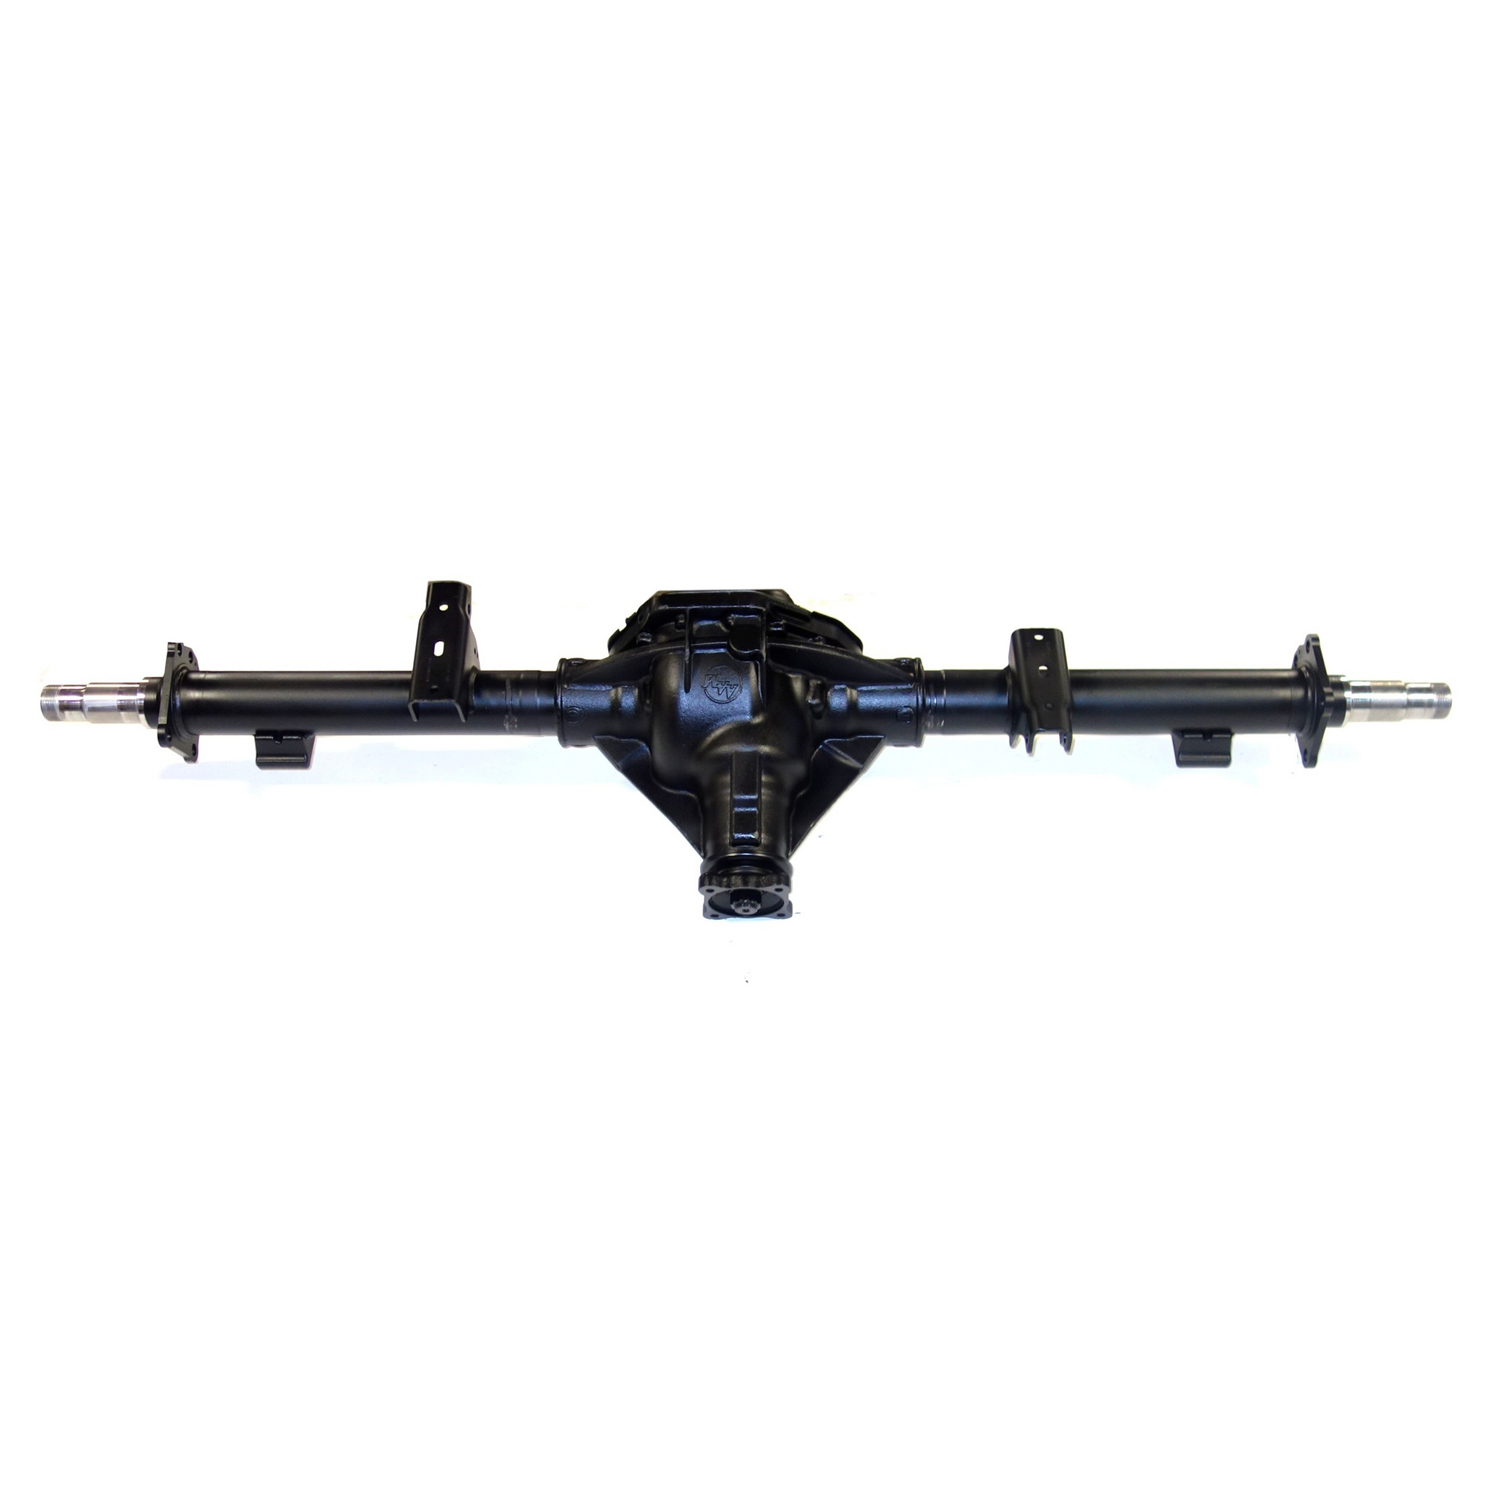 Remanufactured Axle Assy for Chy 14 Bolt Truck 2009 Dodge Ram 2500 4.11 , 2wd, Posi LSD